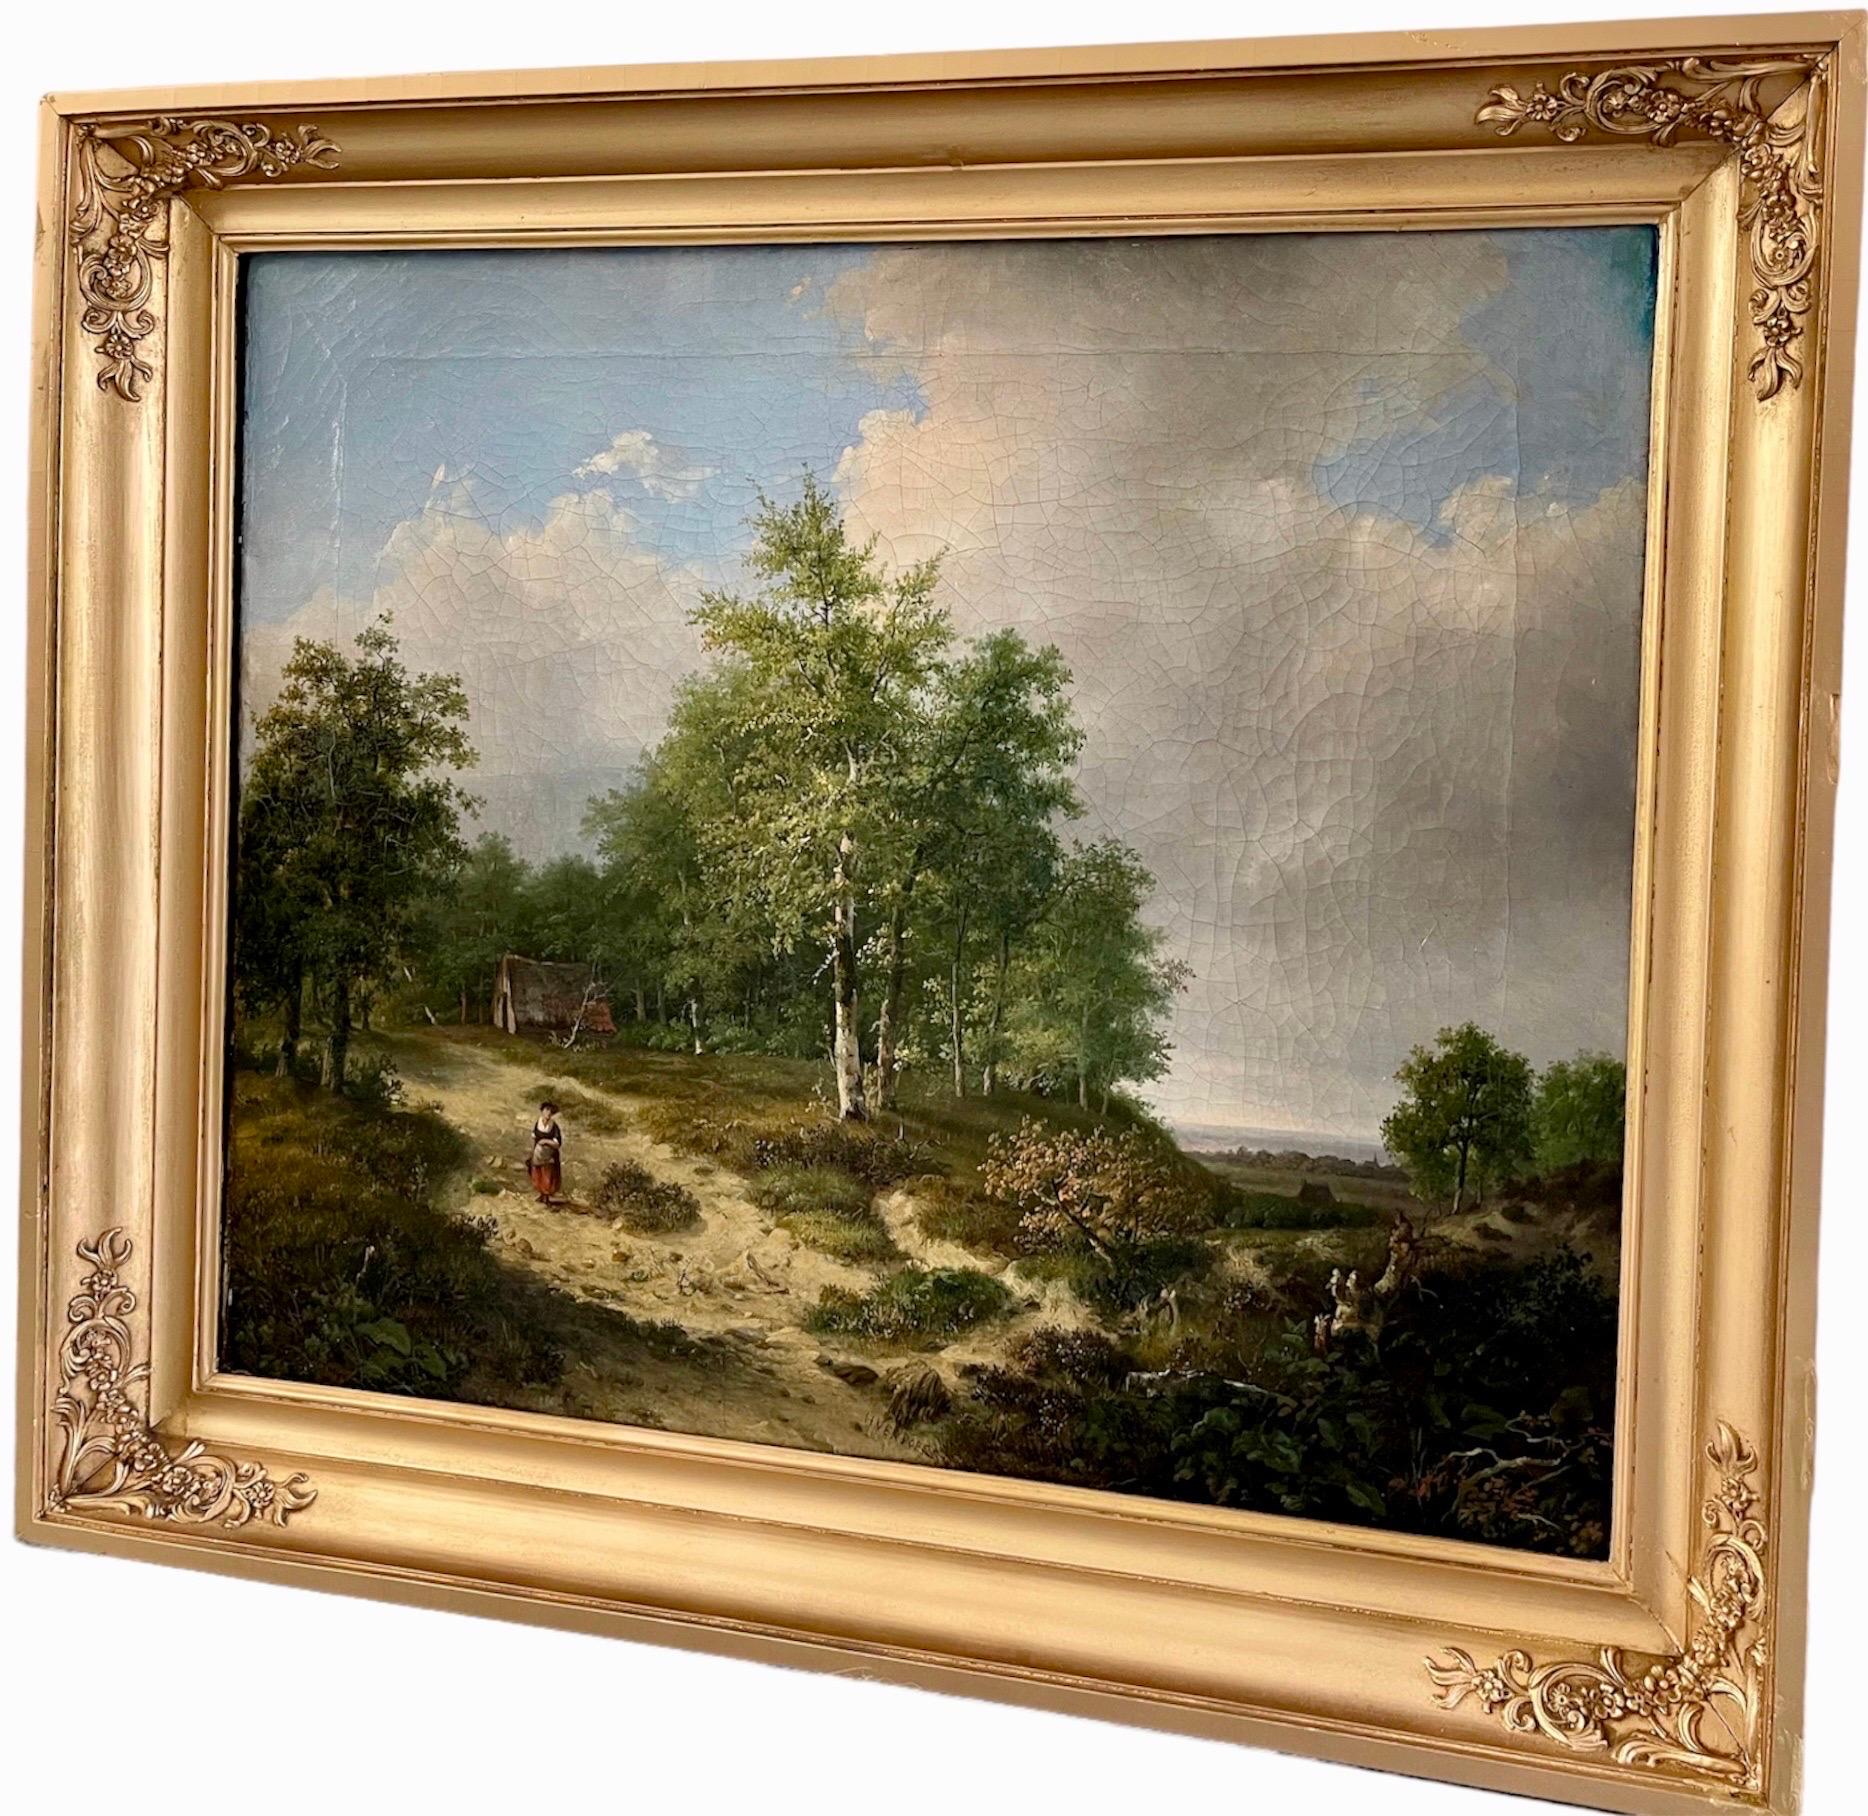 Romantic 19th century Dutch landscape painting by Hendrick Verpoeken 

This peaceful painting depicts a beautiful and tranquil Dutch countryside landscape on a summer sunny day. The sky is vibrantly blue, the trees and plants are in bloom and a